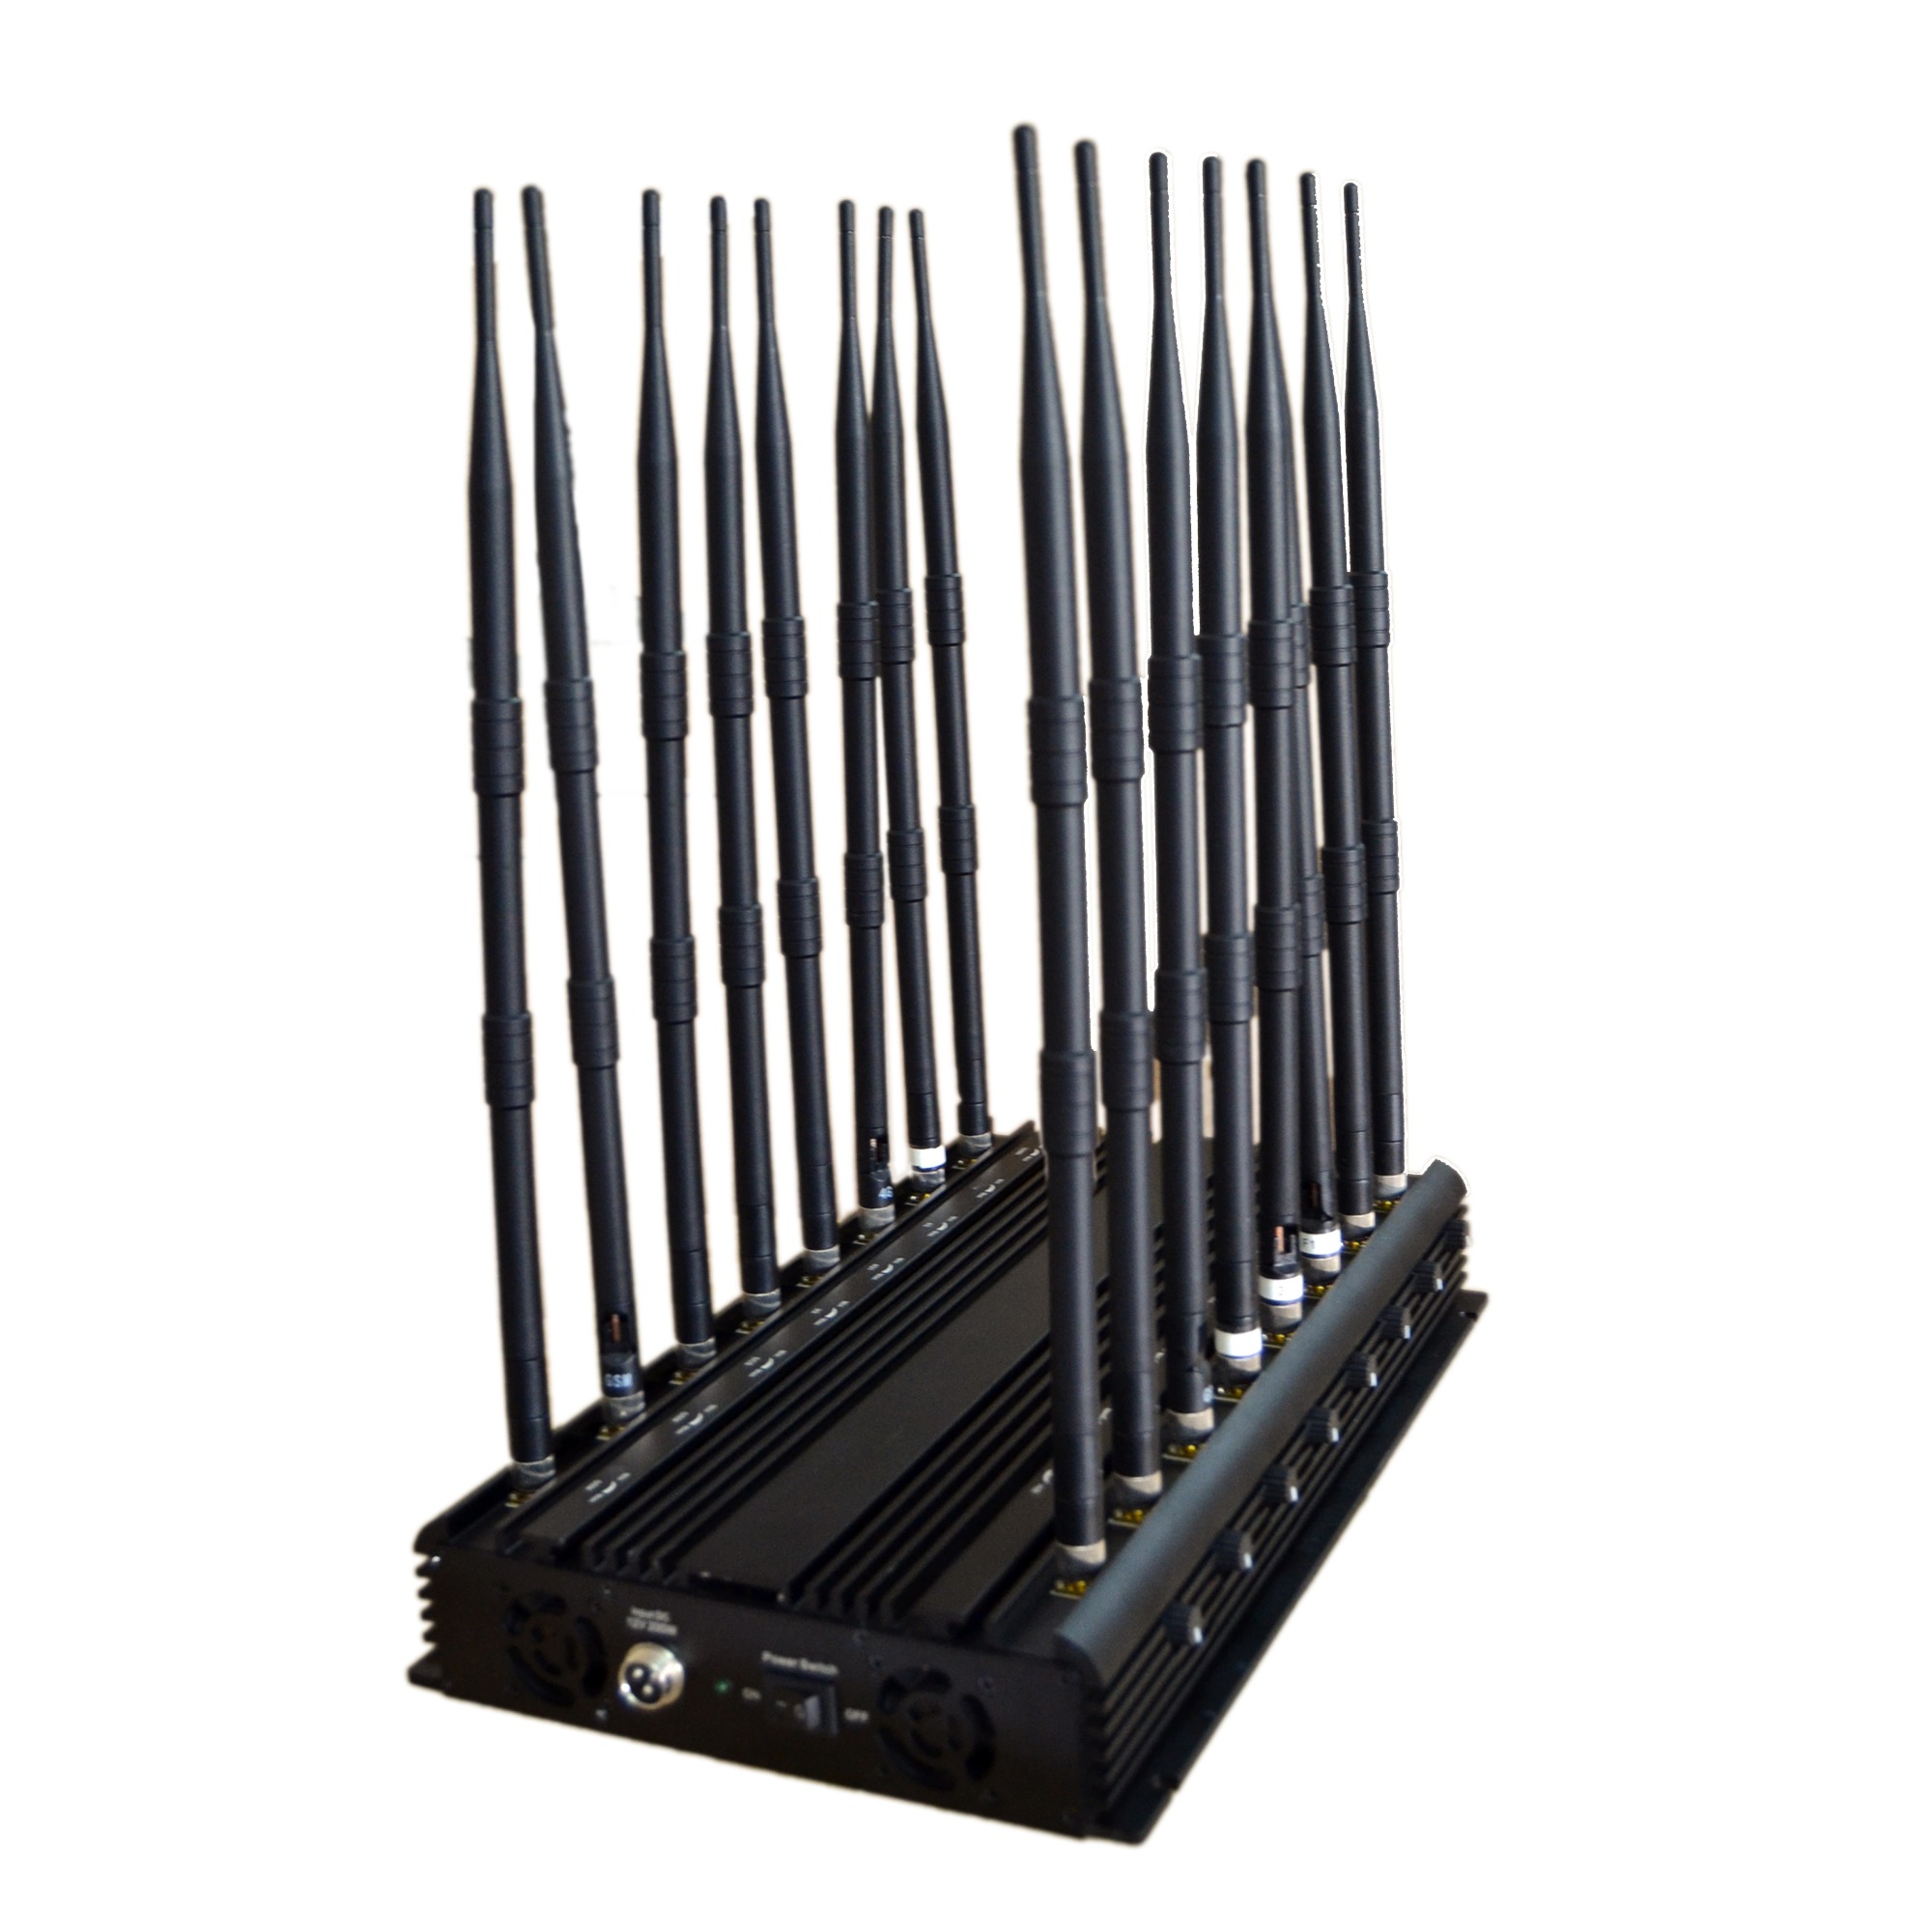 16 Antennas All Bands RF Radio Frequency Jammer from 130-2700mhz